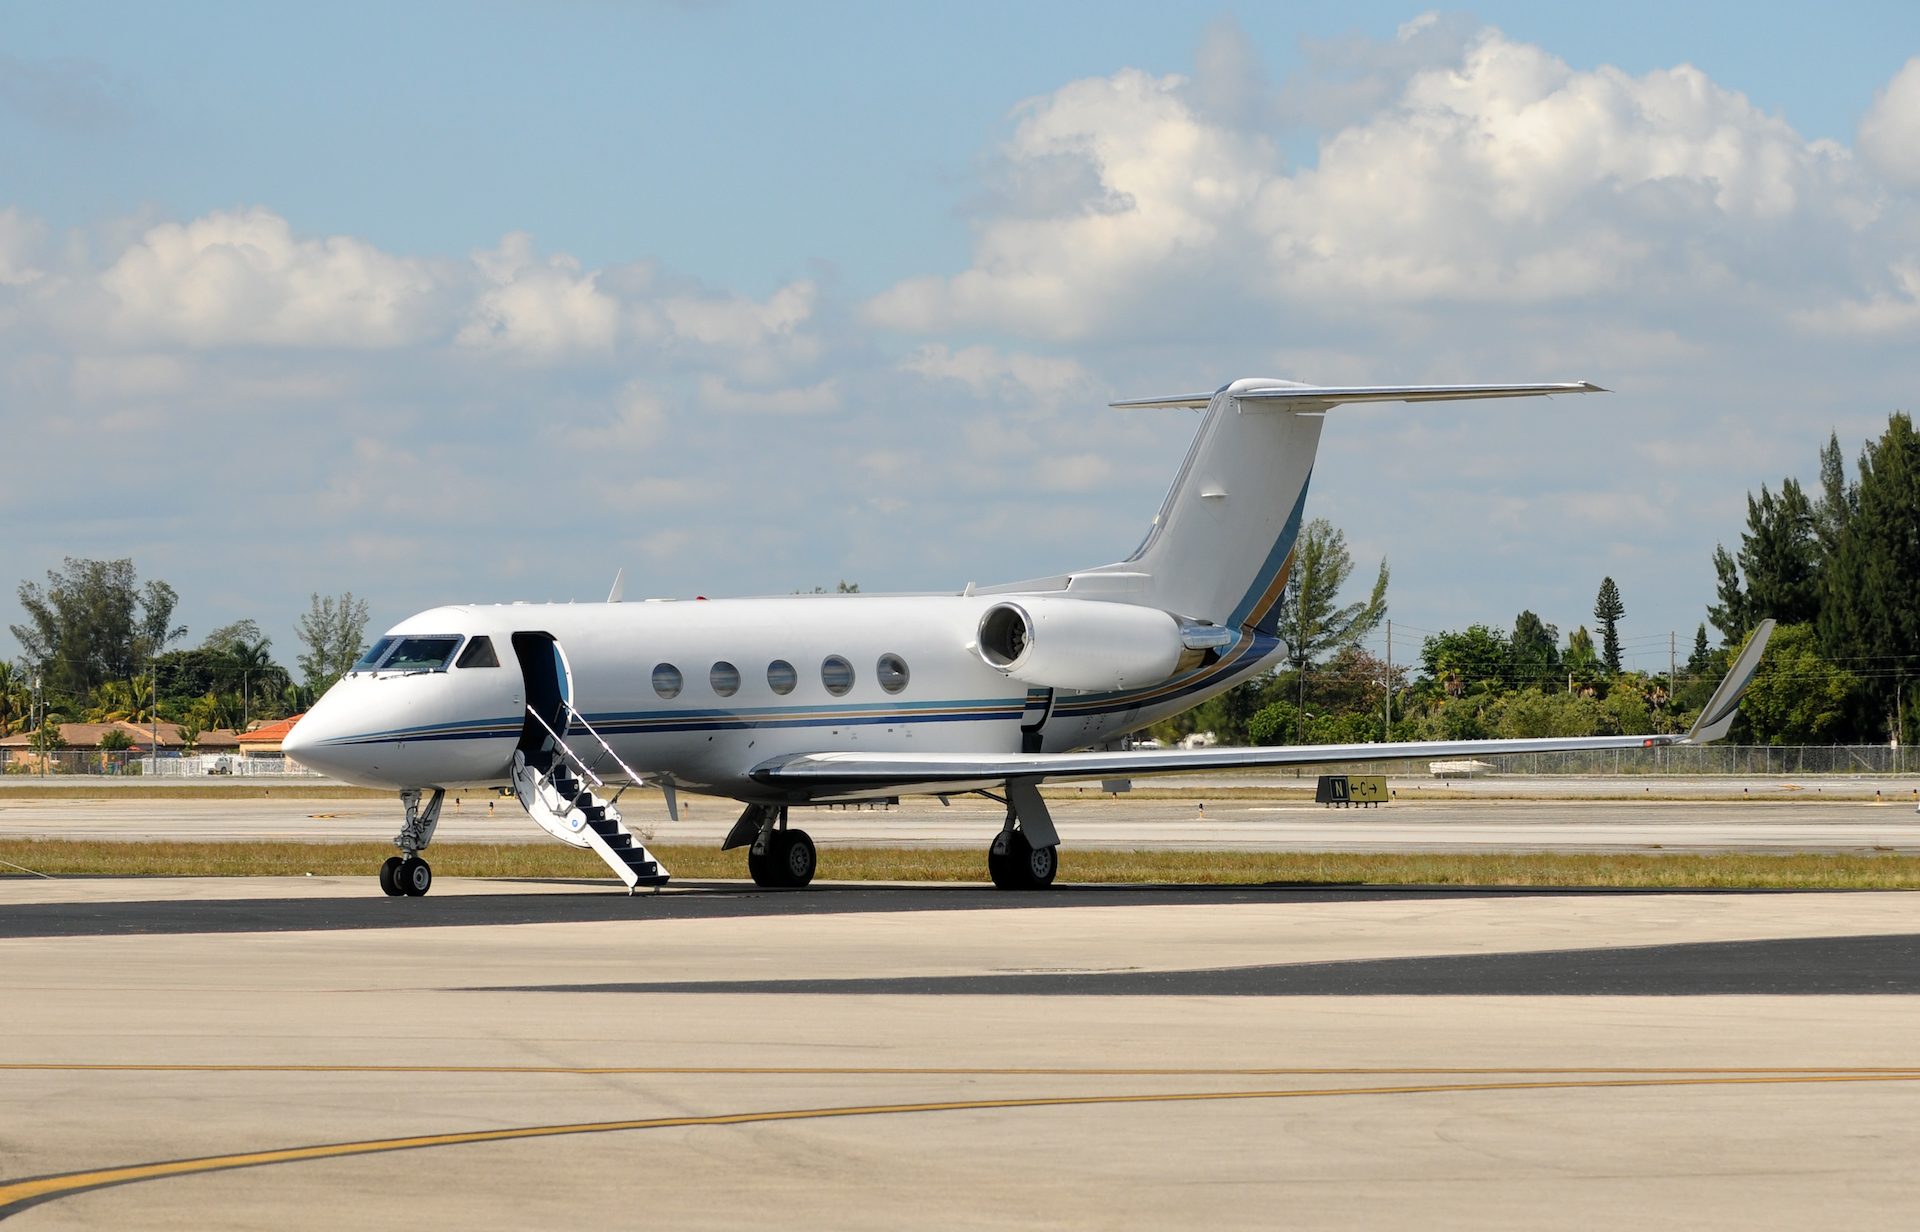 A Step-By-Step Guide on How To Charter A Private Jet